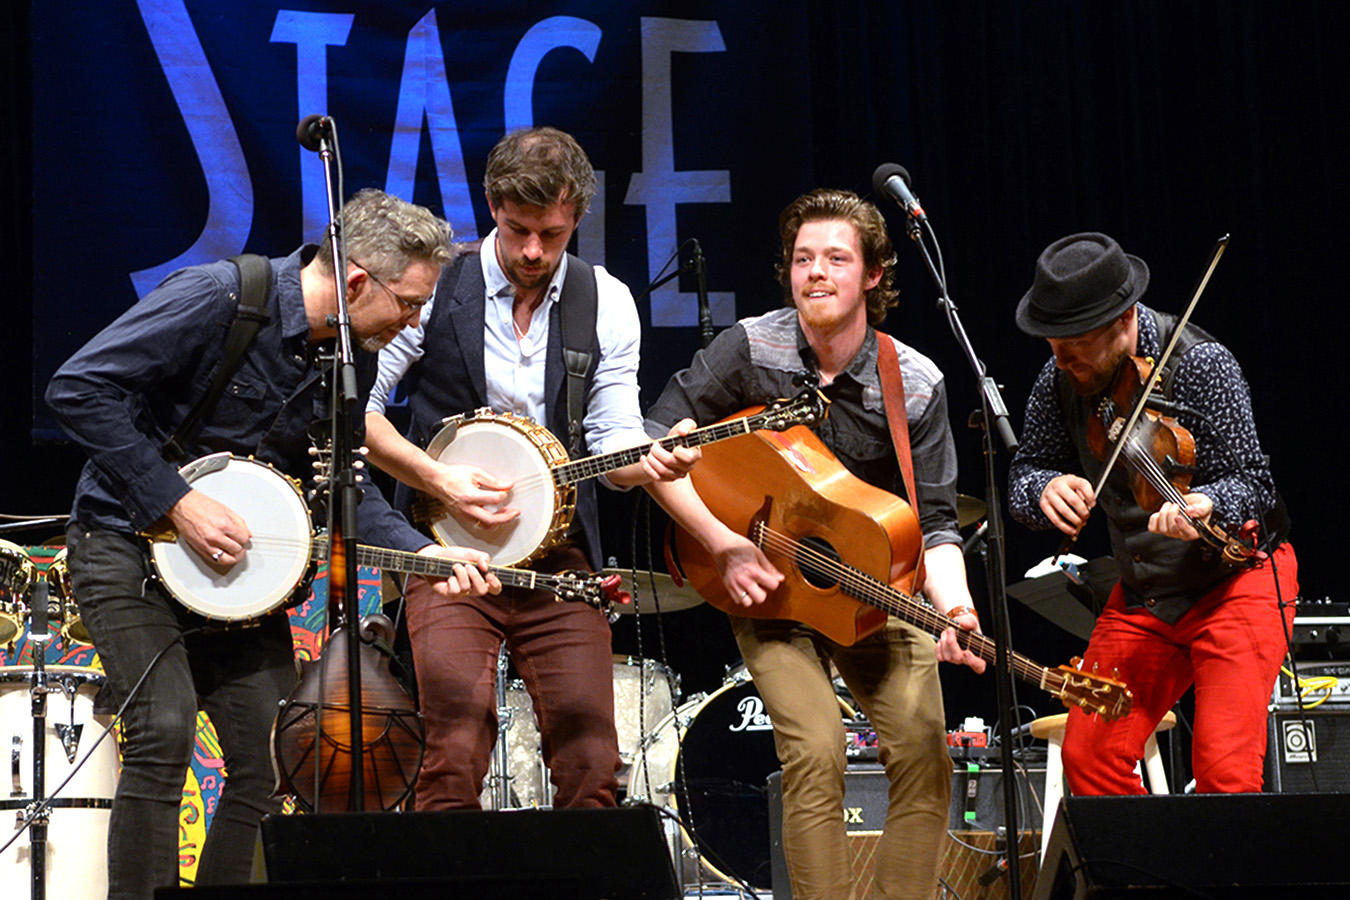 Listen to We Banjo 3 on Mountain Stage West Virginia Public Broadcasting